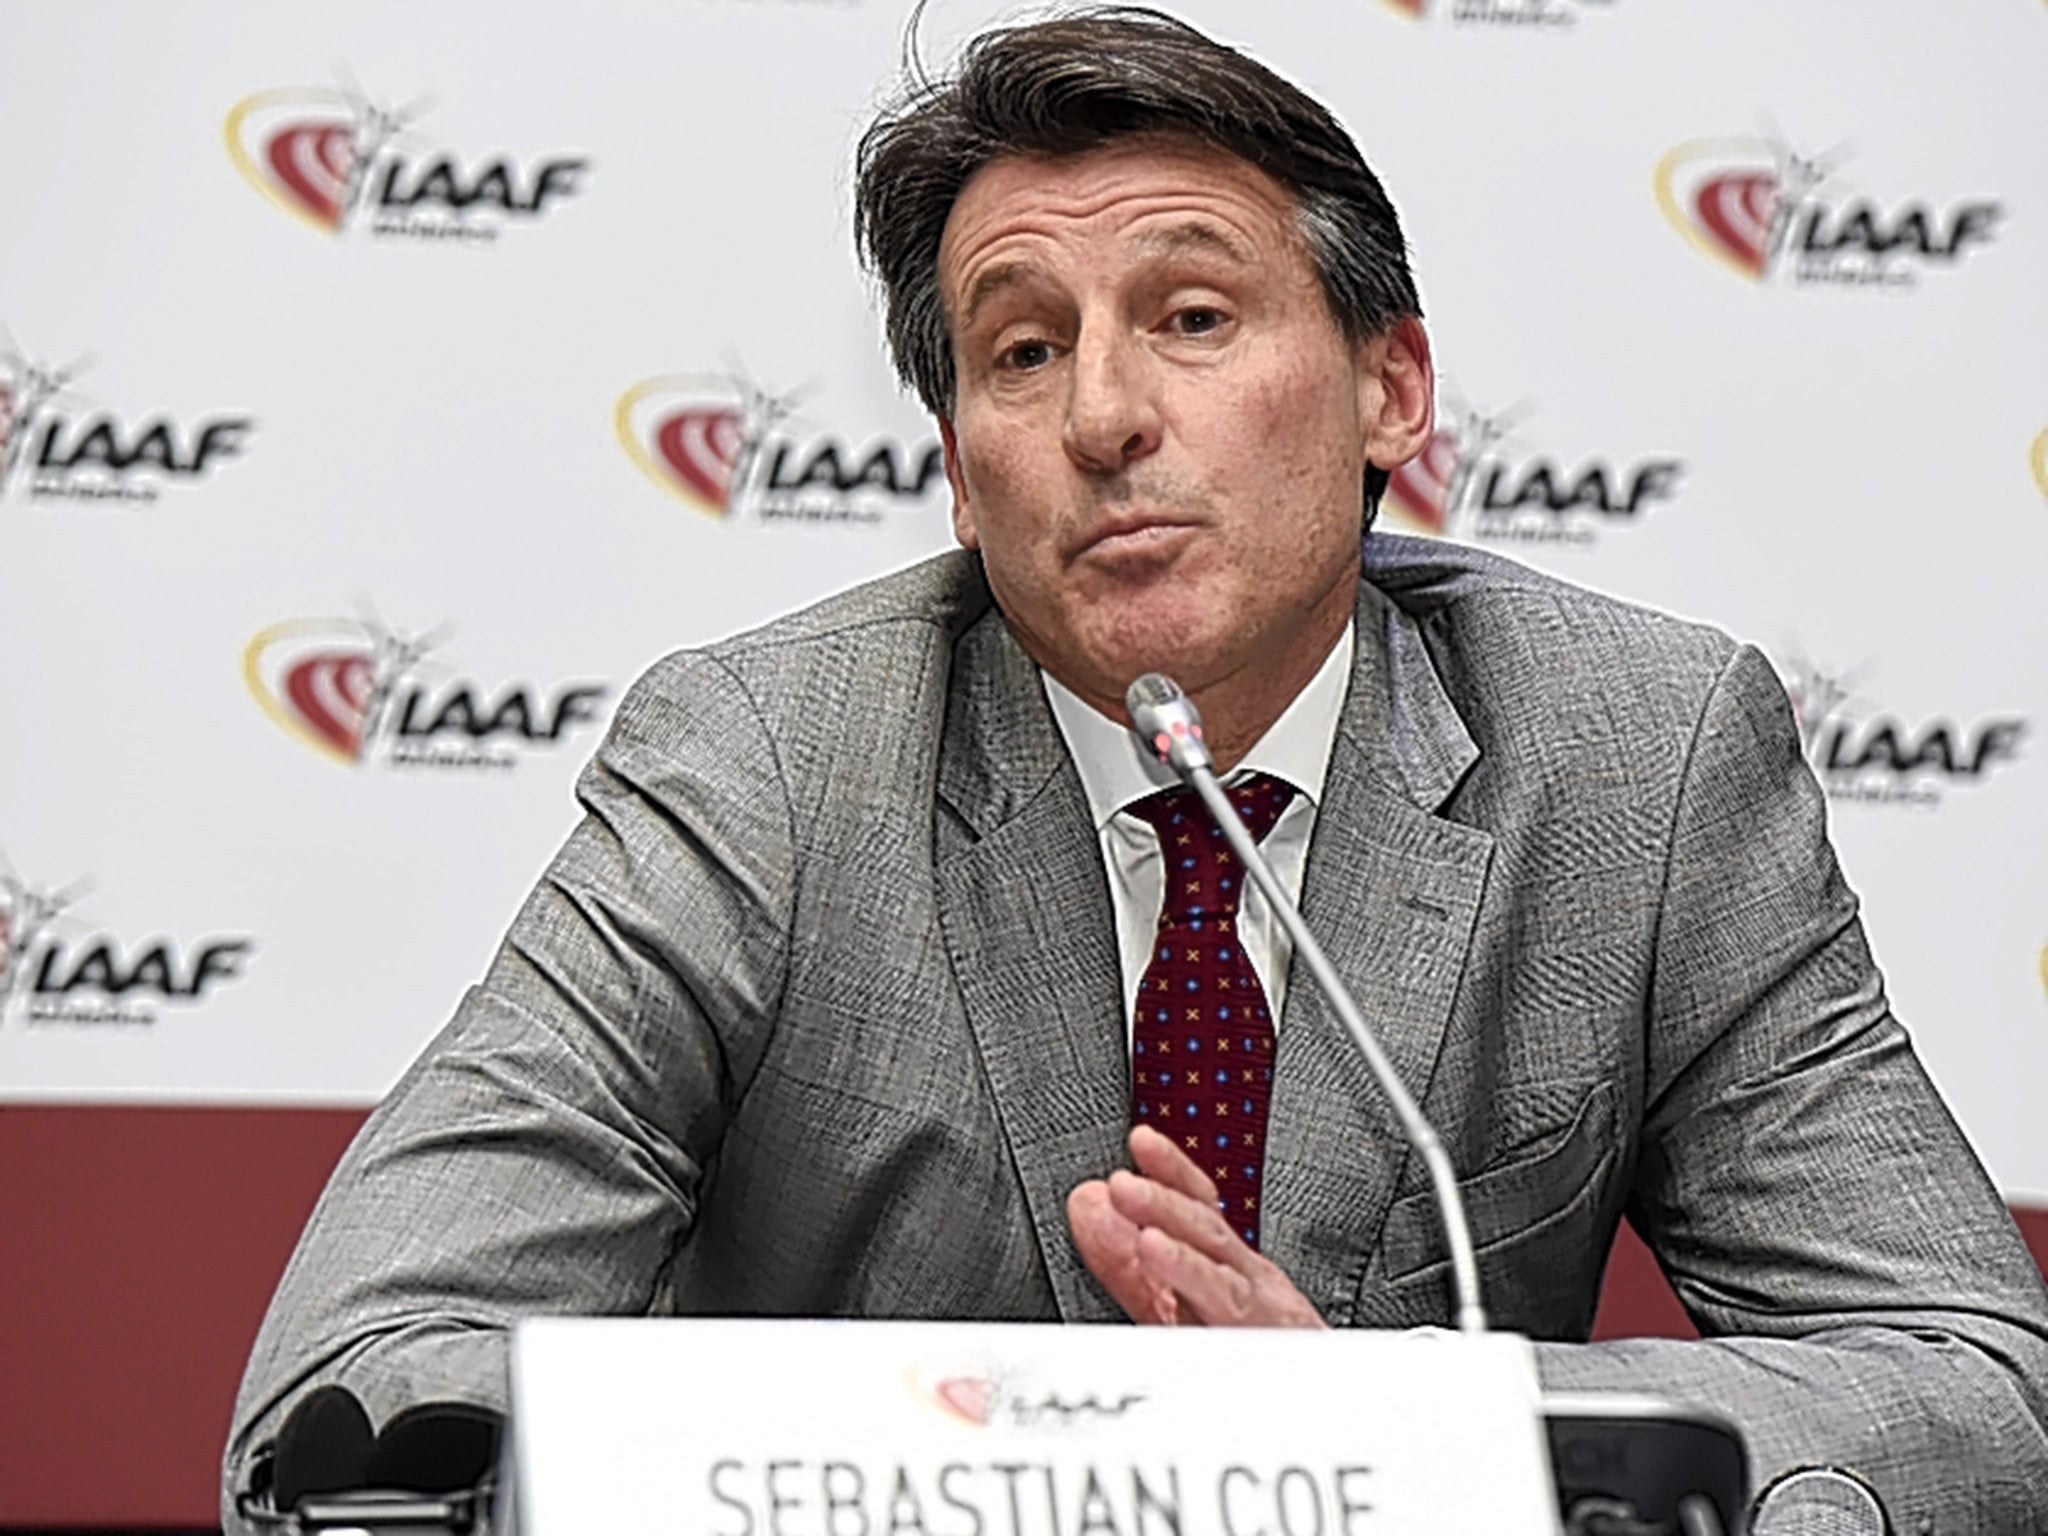 Might we see a shift in the mindset of Sebastian Coe?